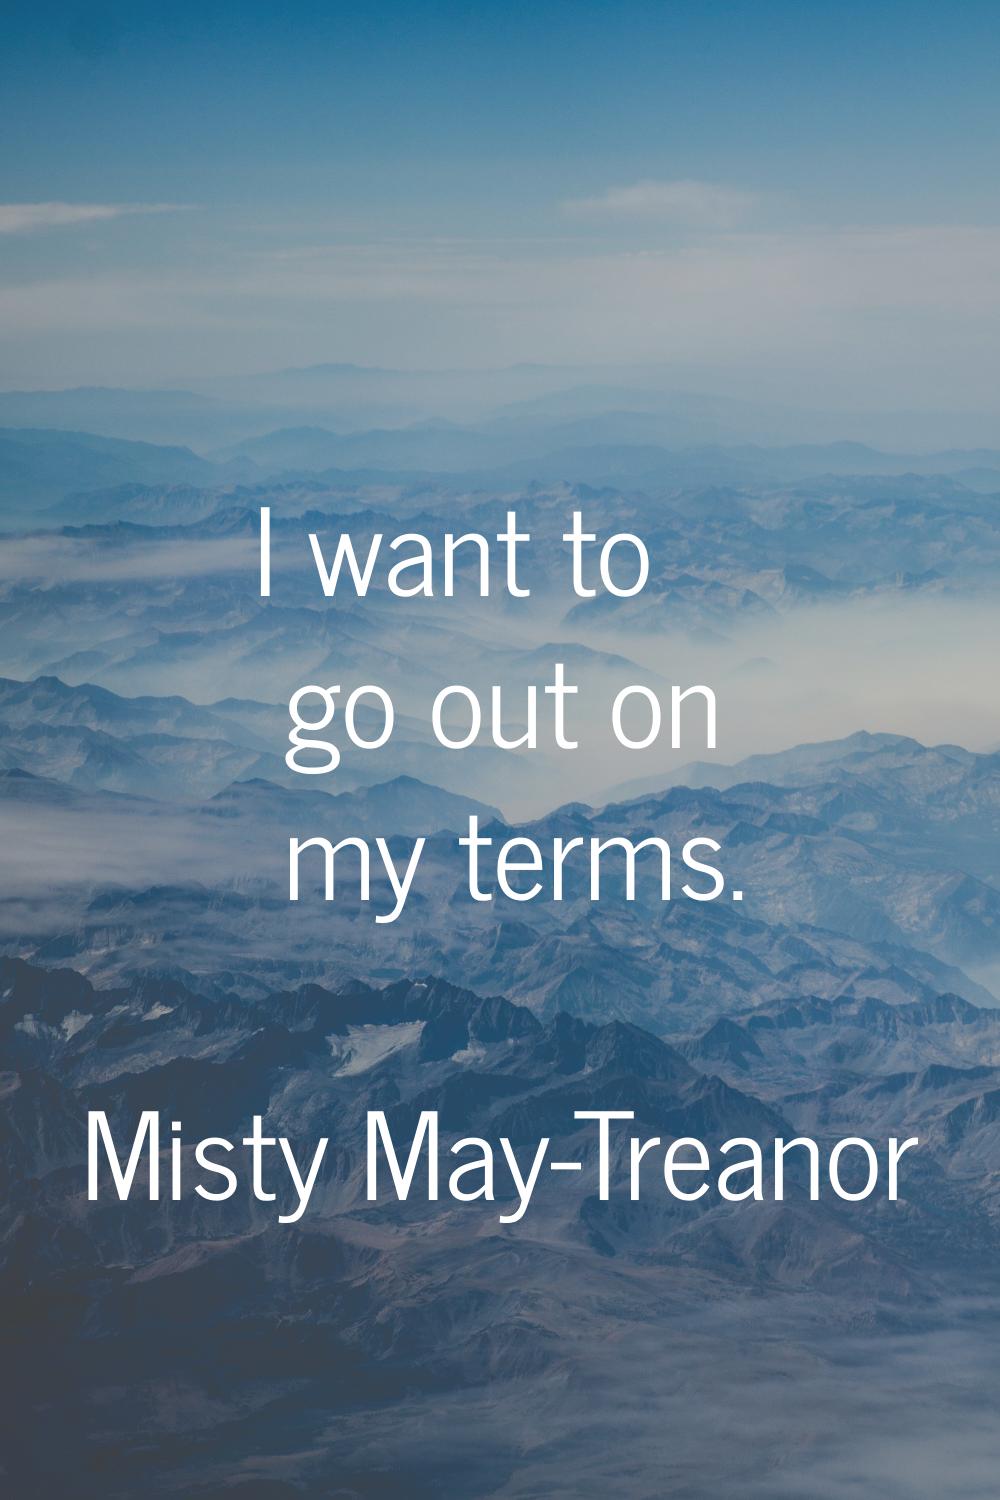 I want to go out on my terms.